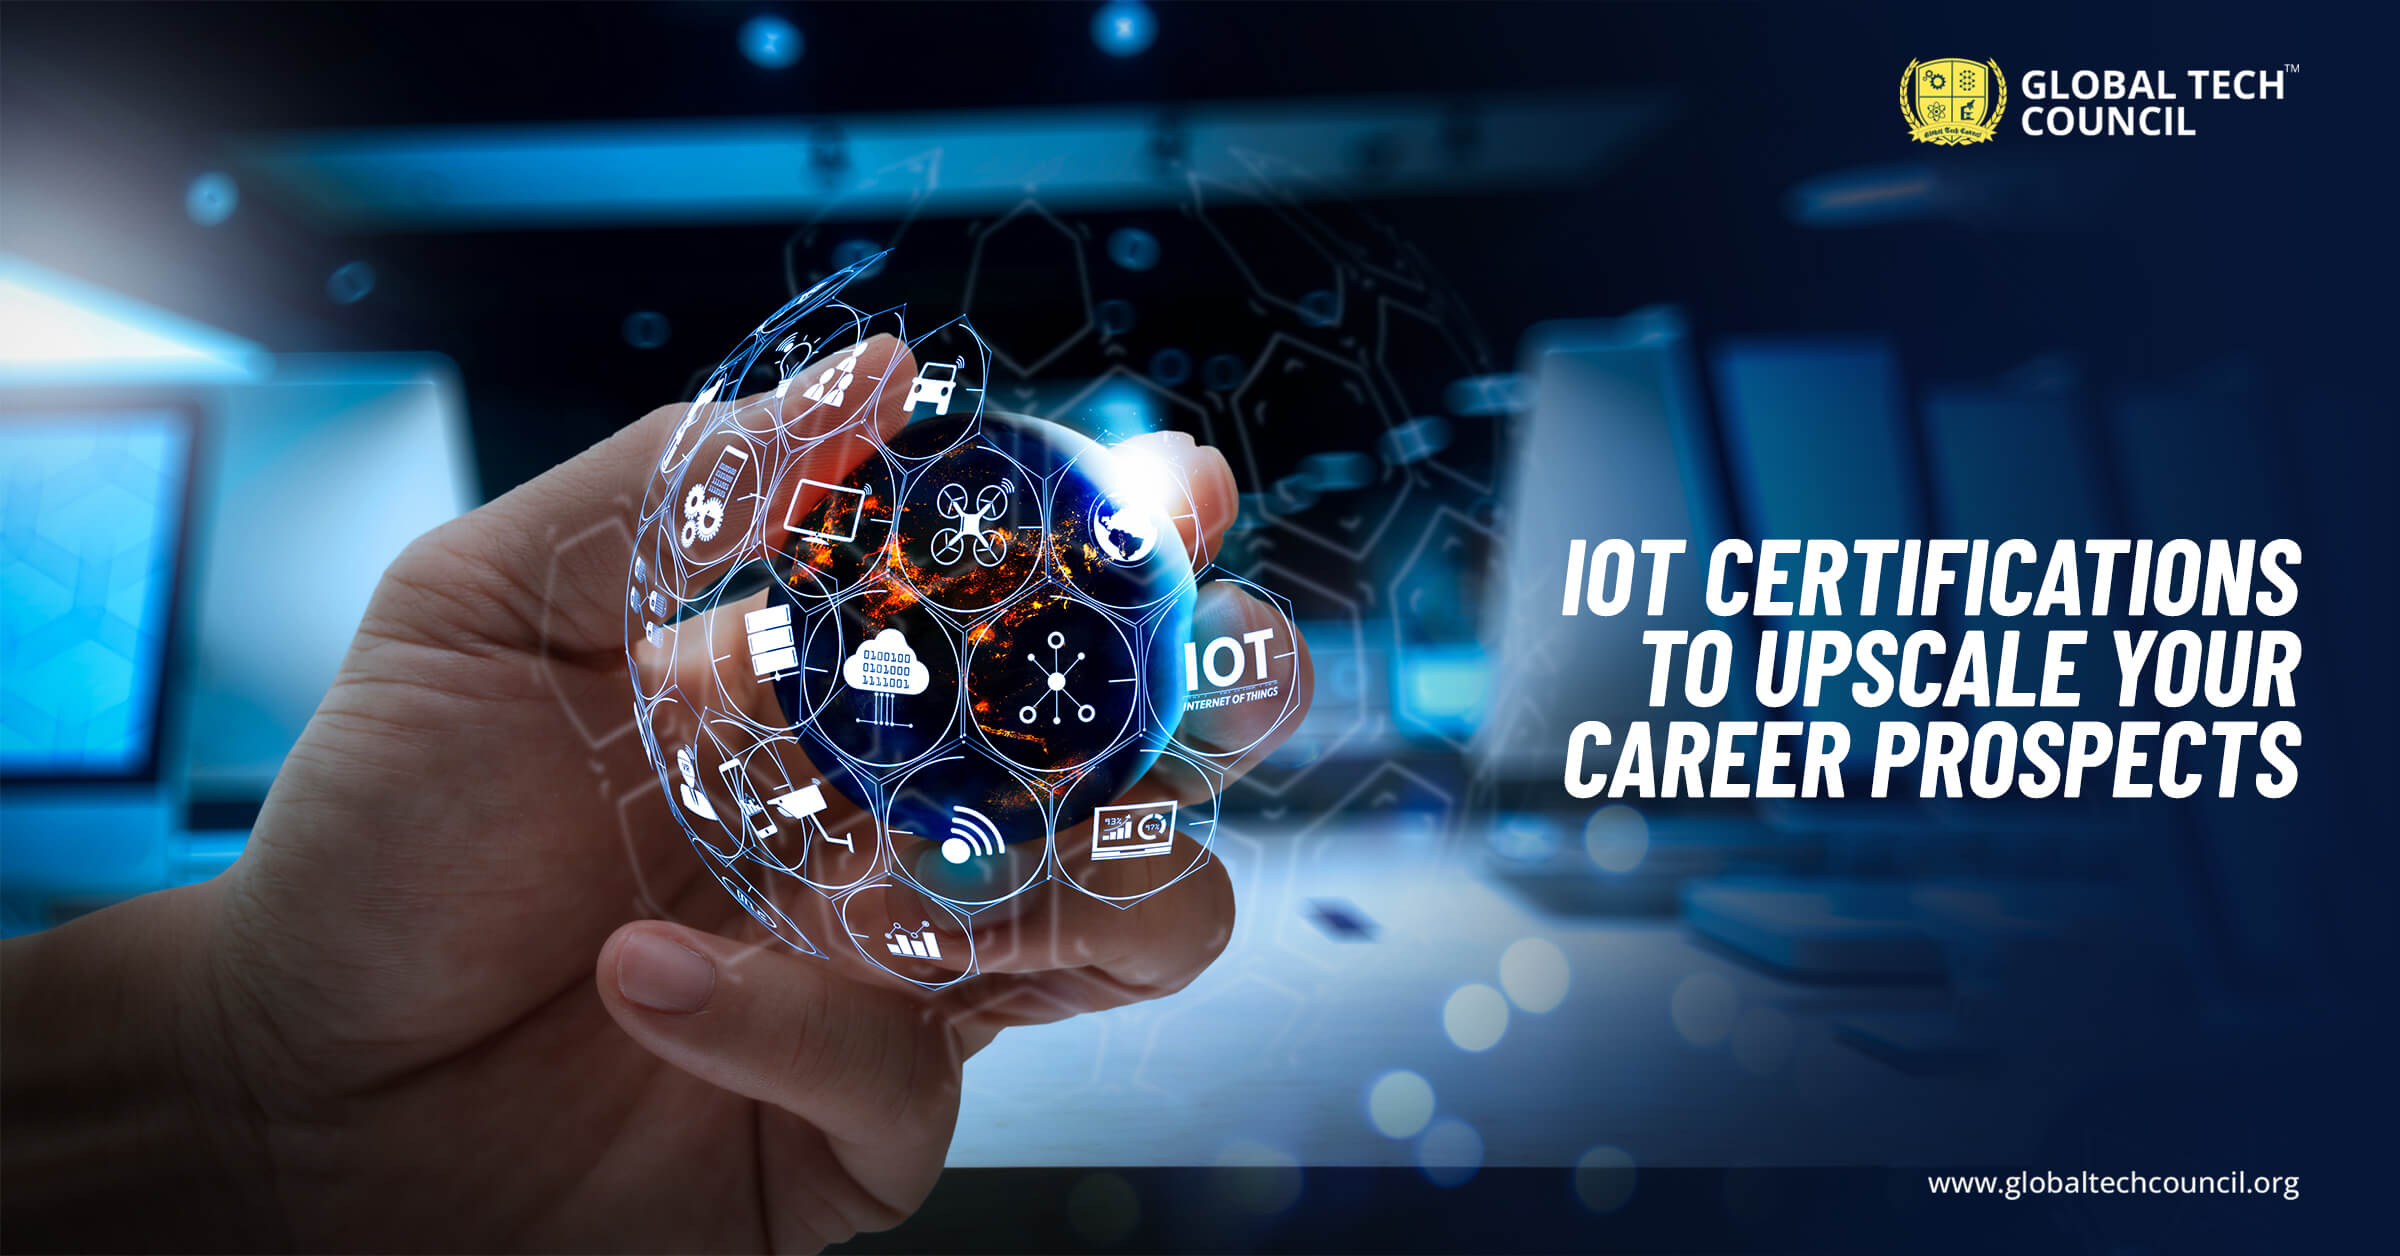 IoT Certifications to Upscale Your Career Prospects